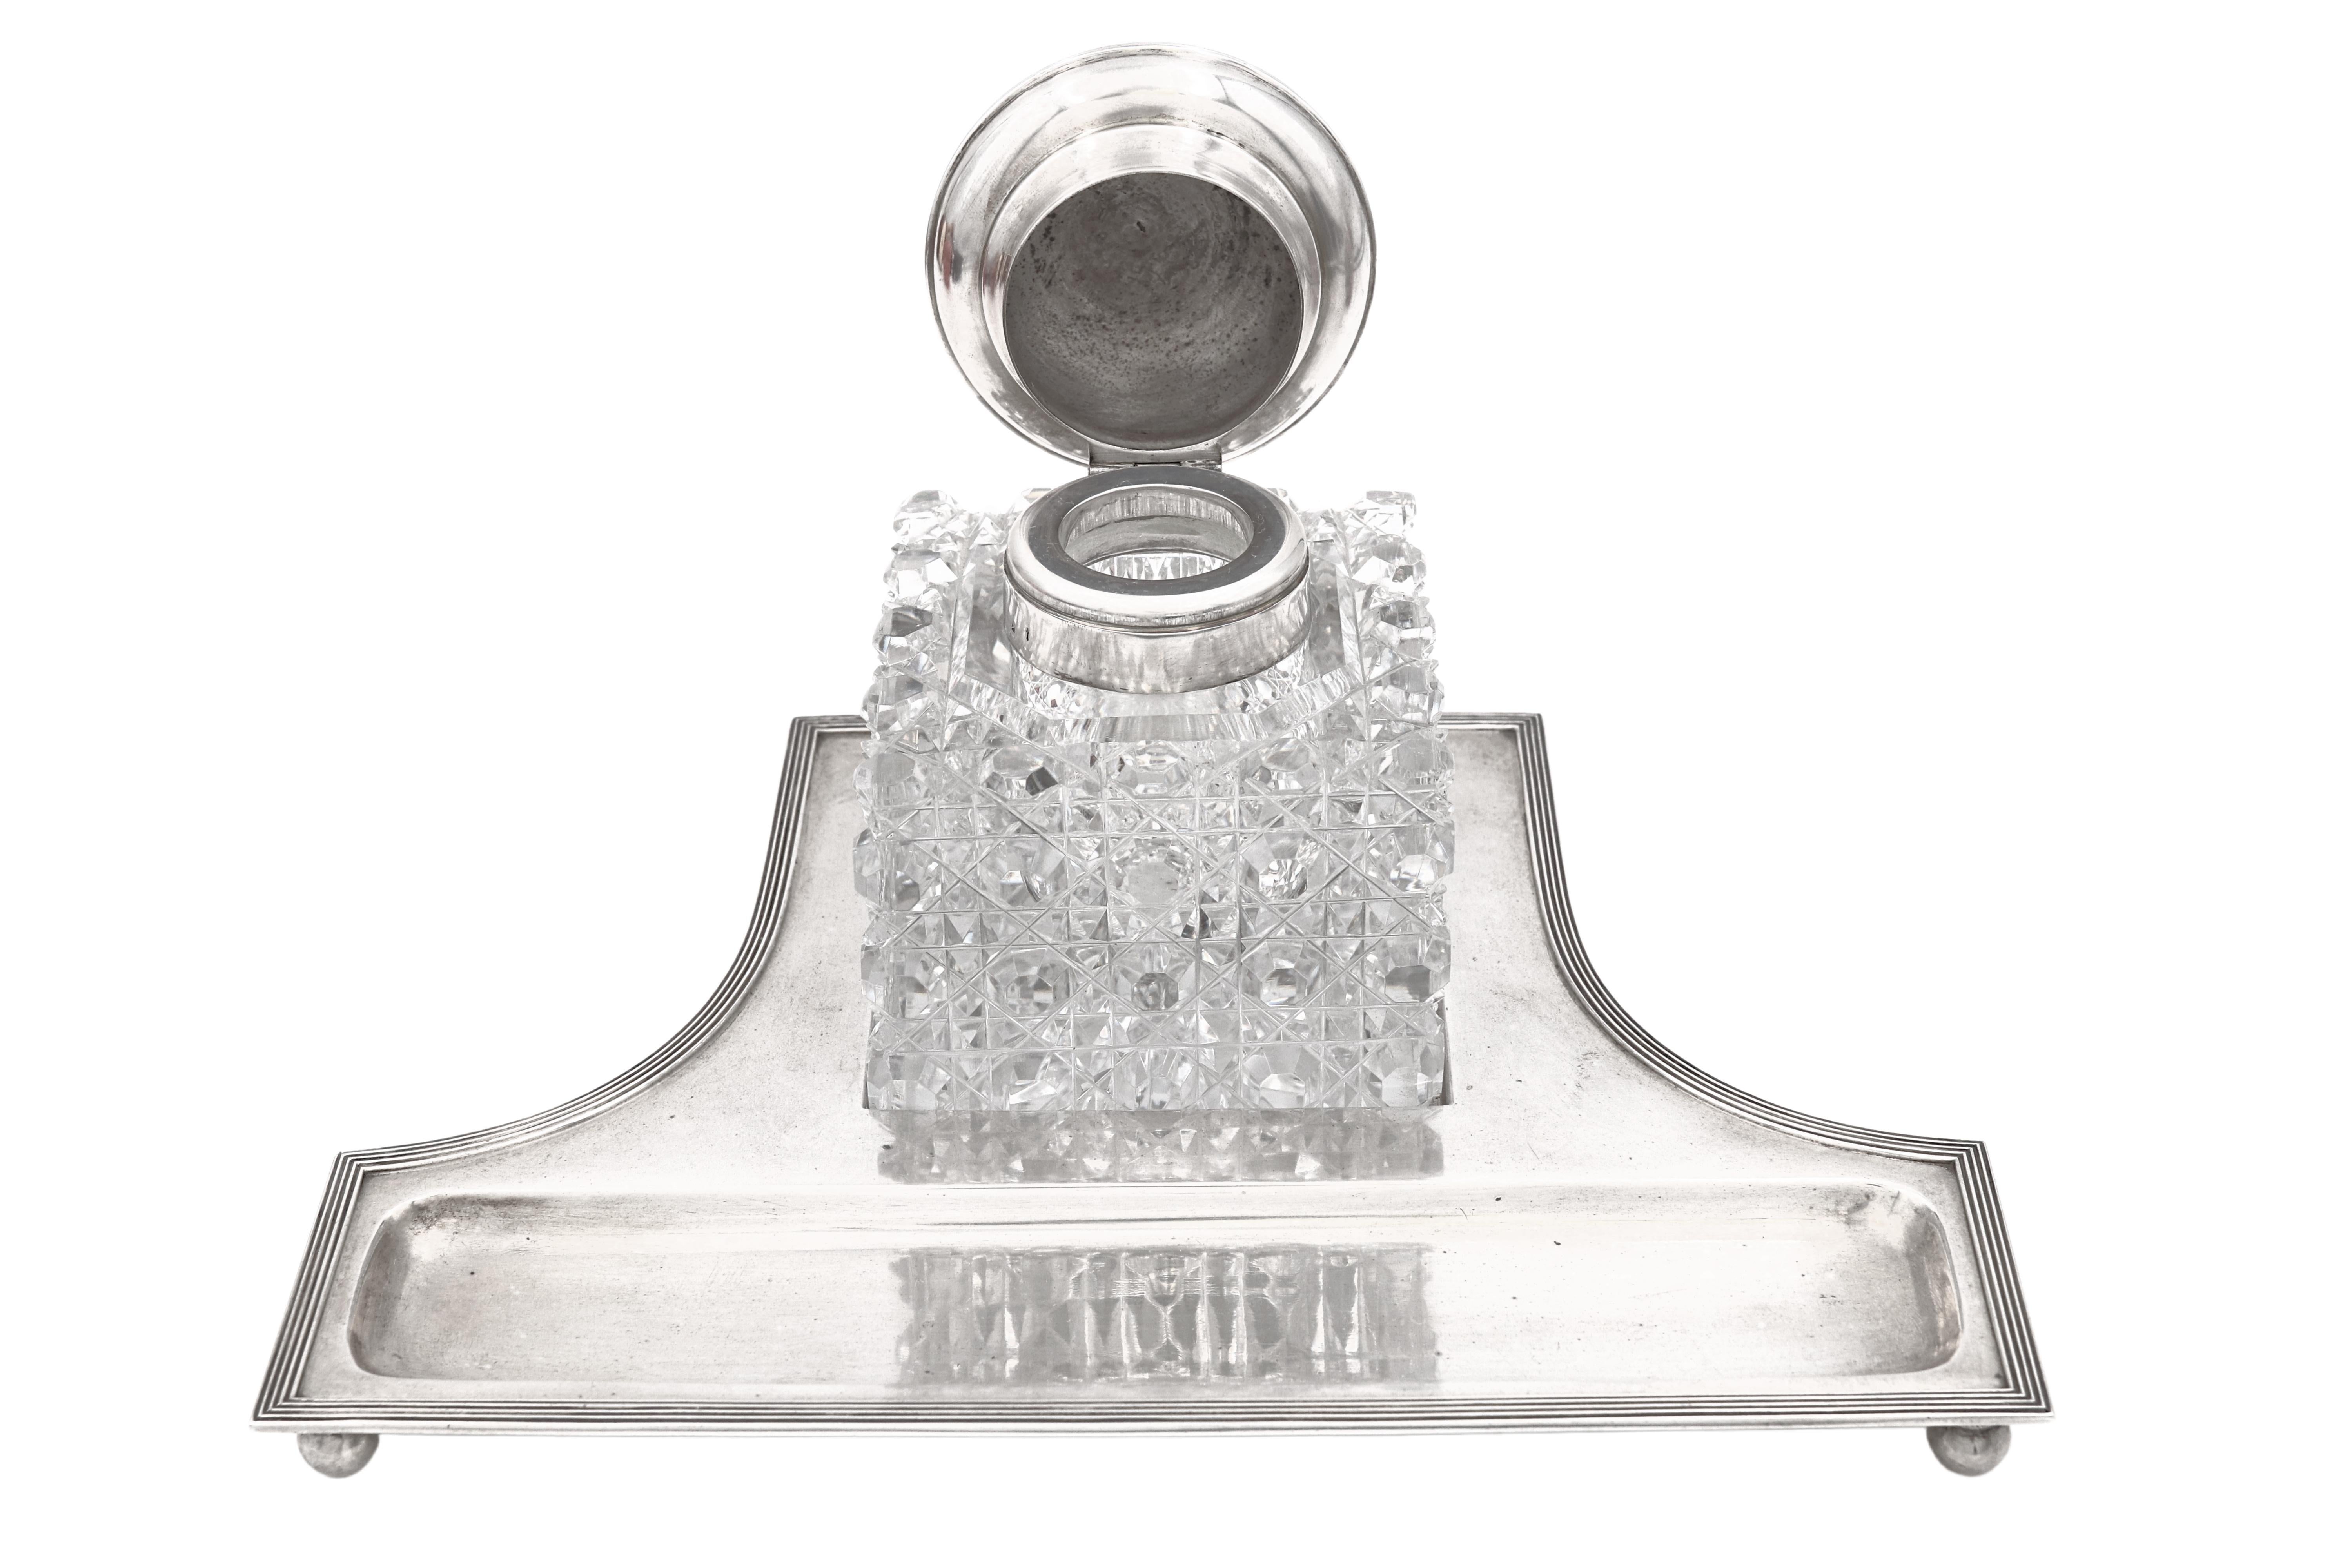 Central European silver and crystal glass inkwell on stand which has 4 balled feet and a rim with a geometrically-inspired pattern in Art Deco style. The stand measures 9 1/2'' in length by 6 7/8'' in width by 2/3'' in height and weighs 10.2 ozt.